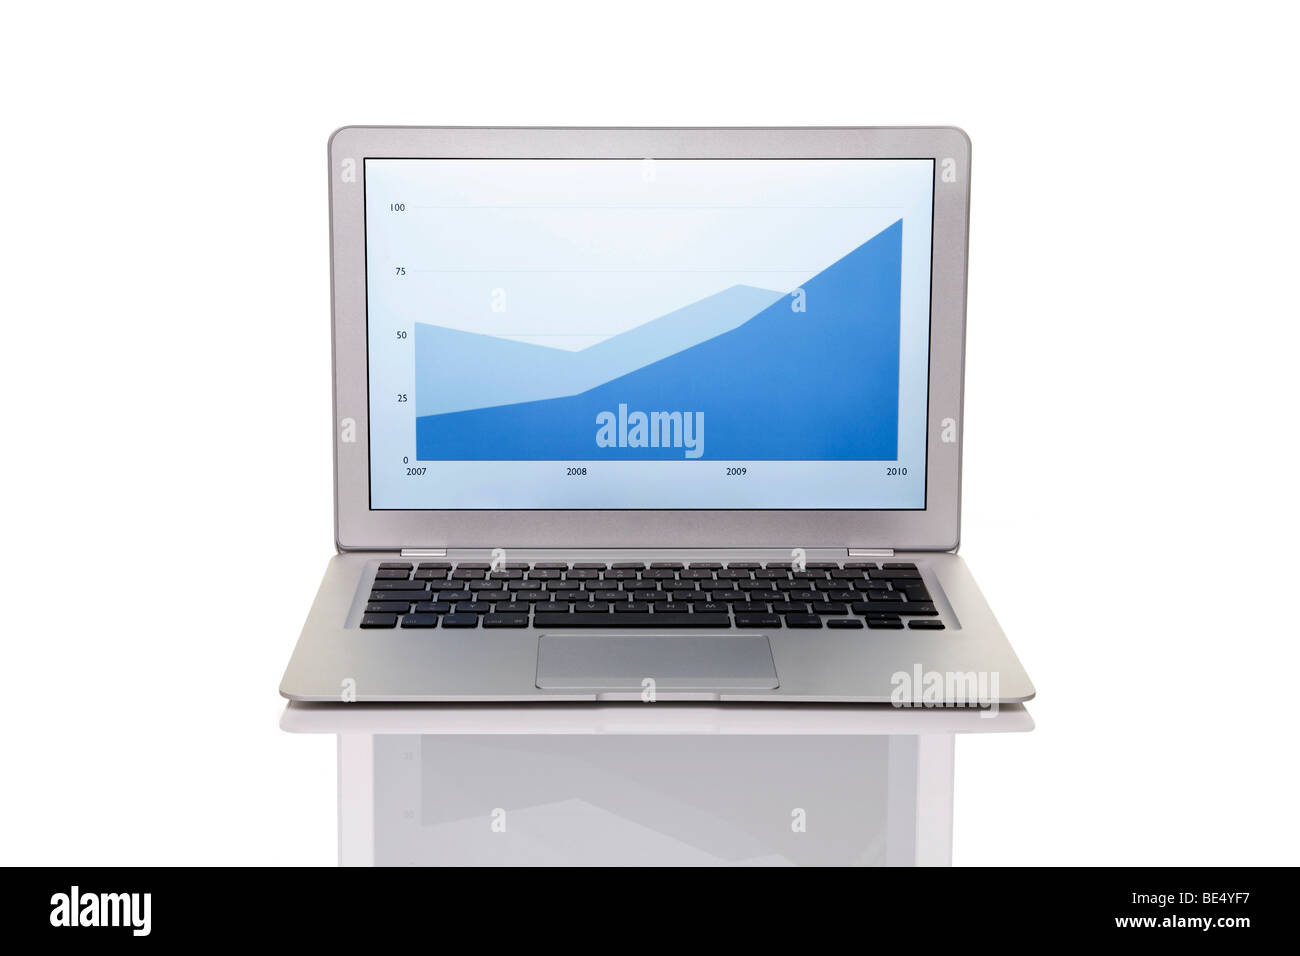 Laptop with a statistics graph Stock Photo